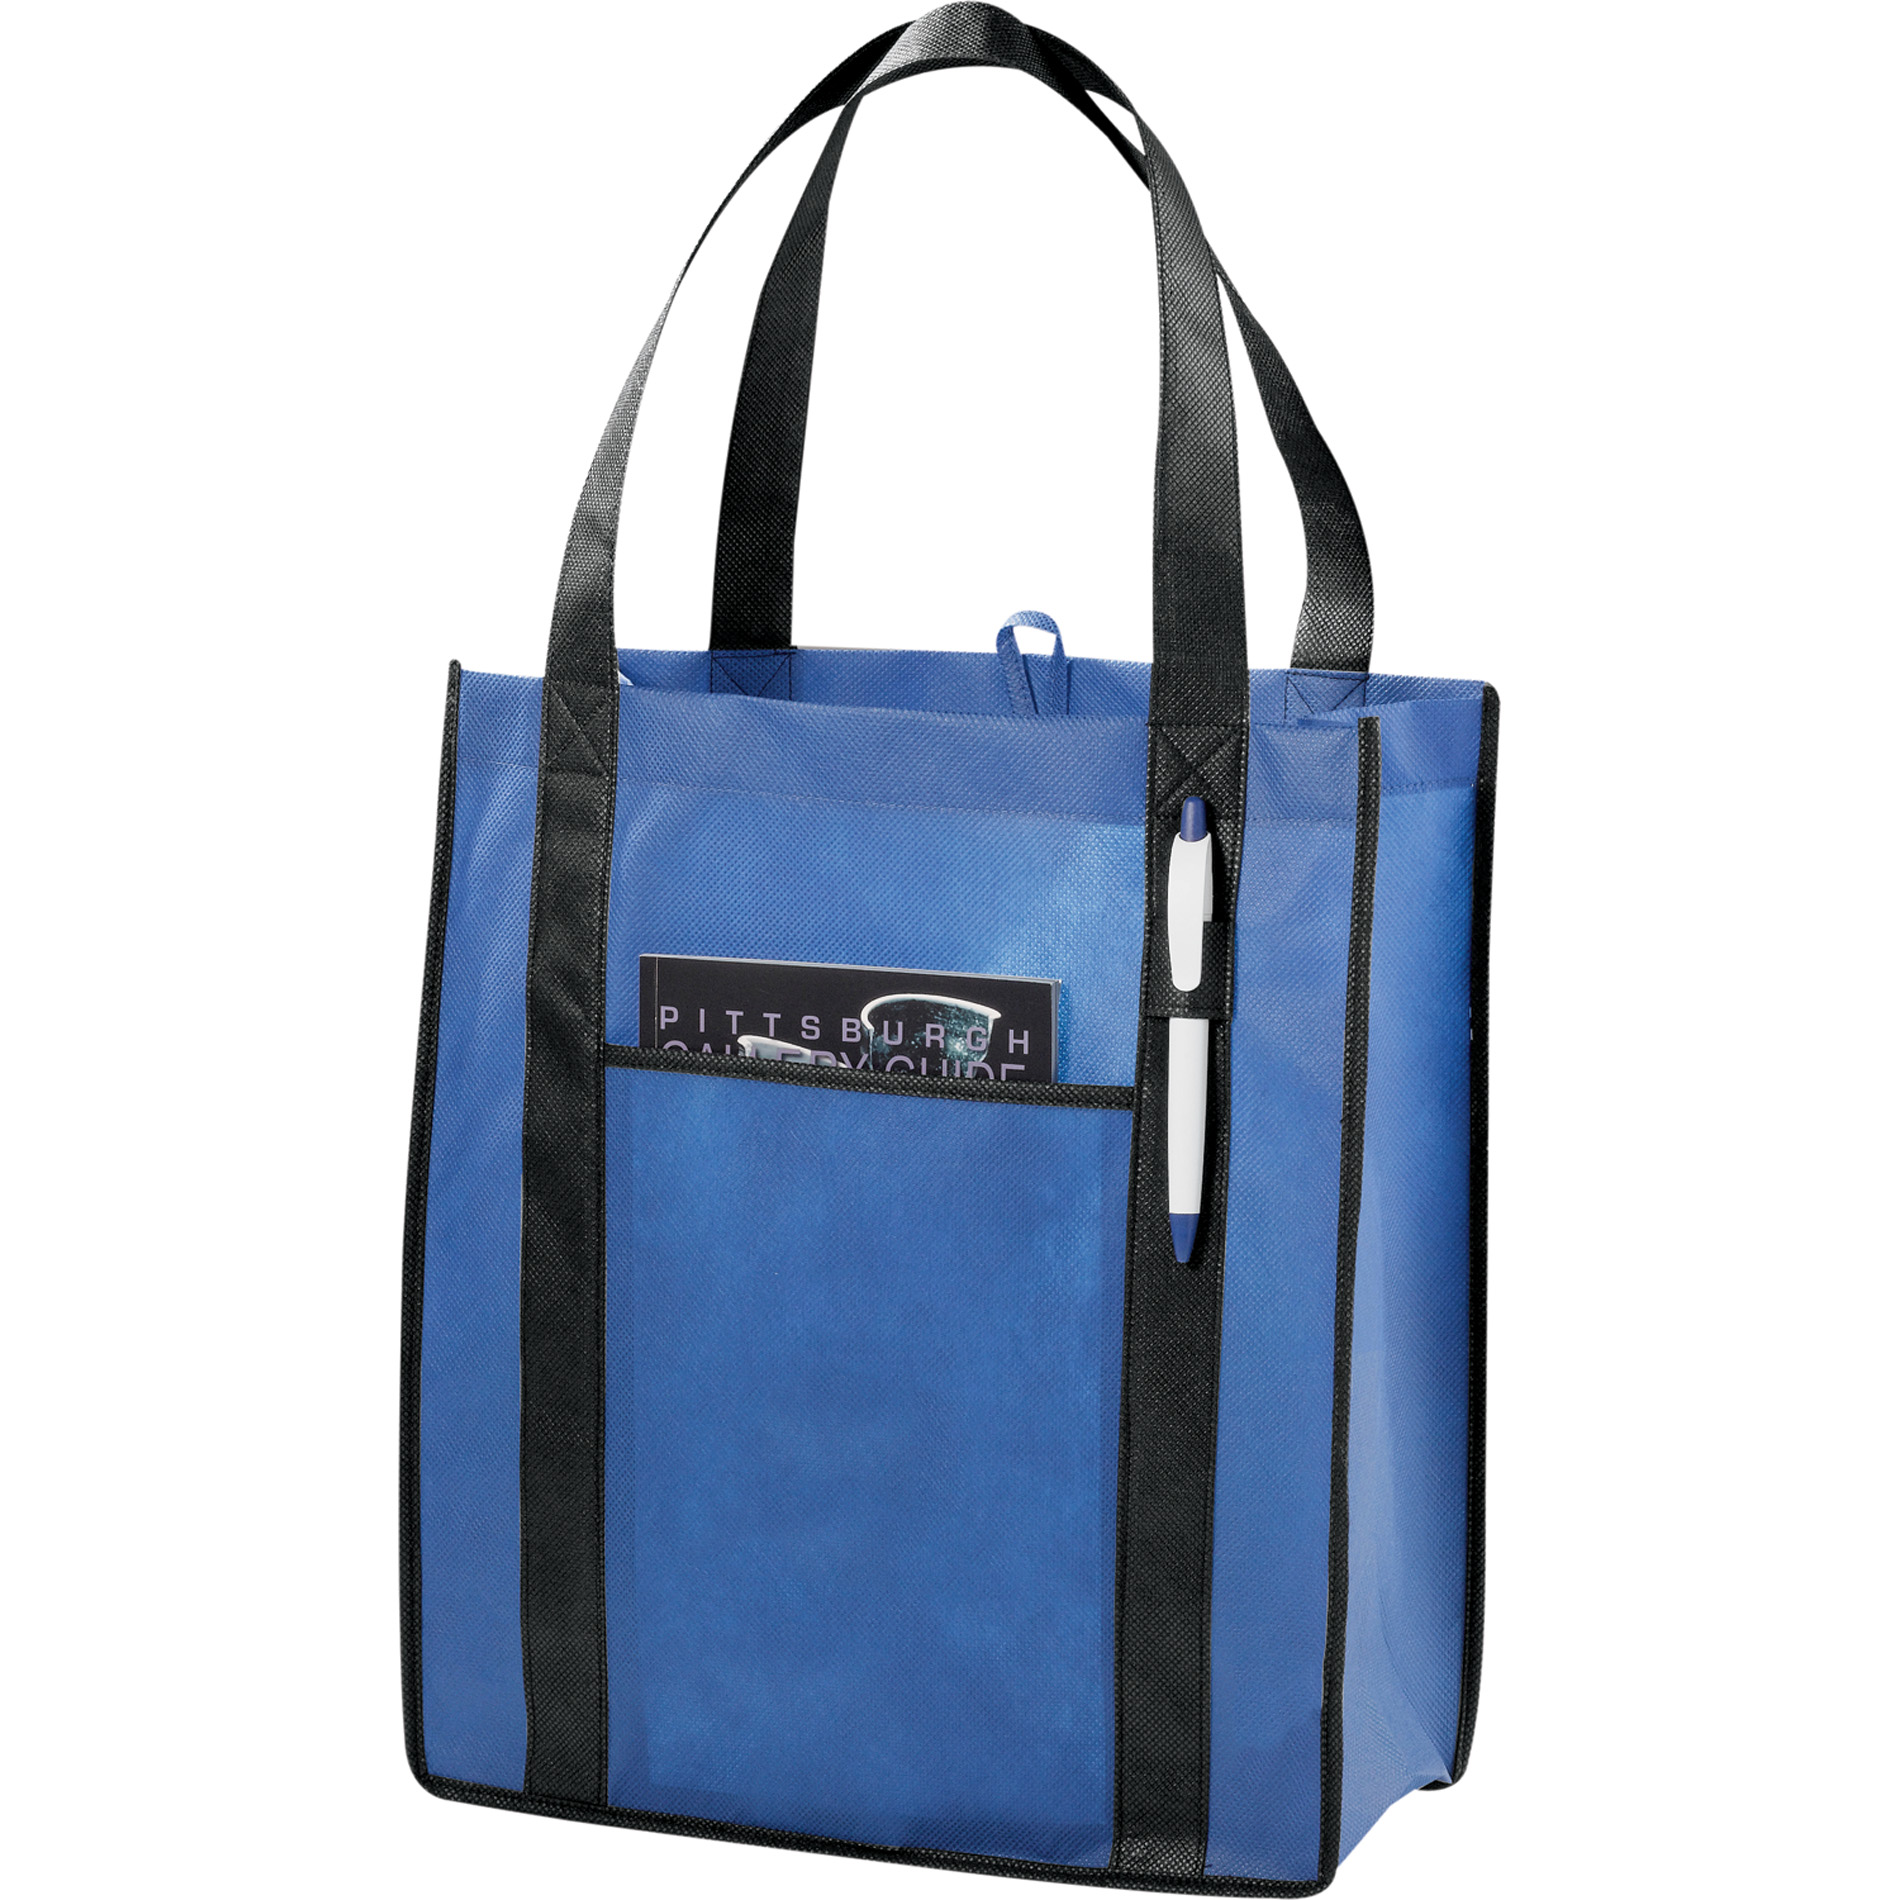 LEEDS 2150-44 - Contrast Non-Woven Carry-All Tote